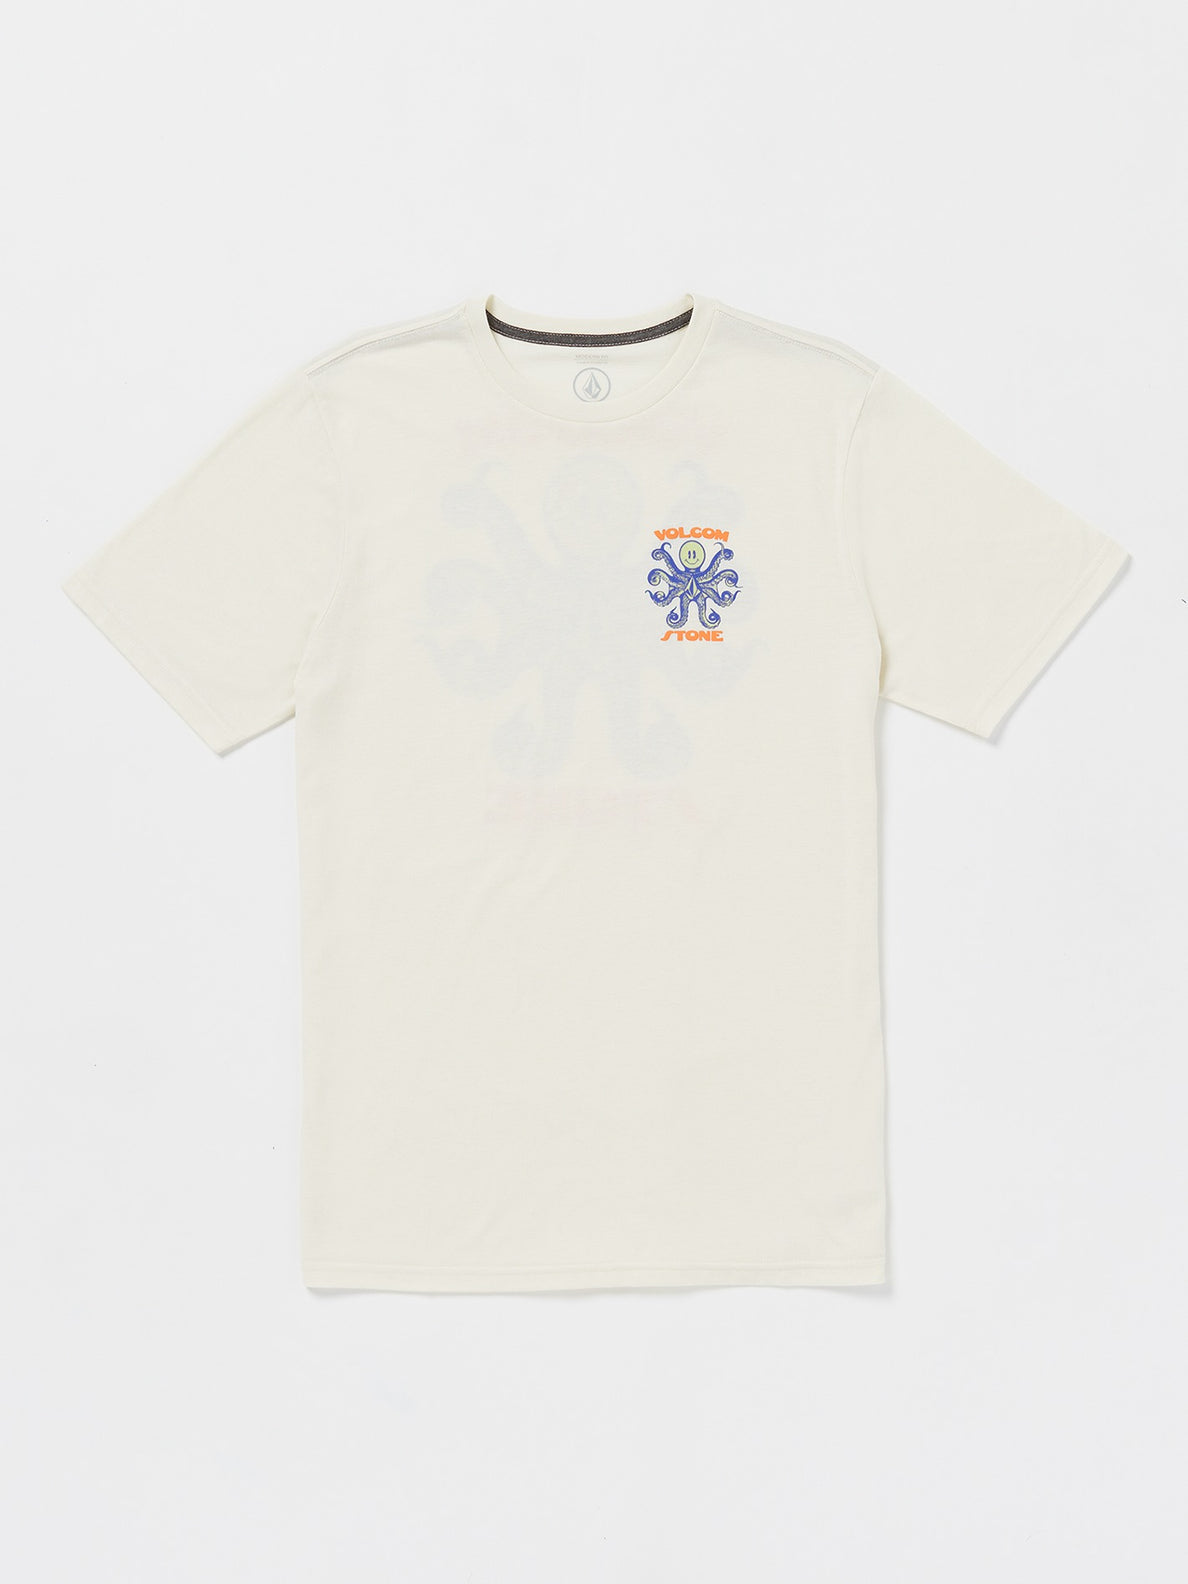 Octoparty Short Sleeve Tee - Off White Heather